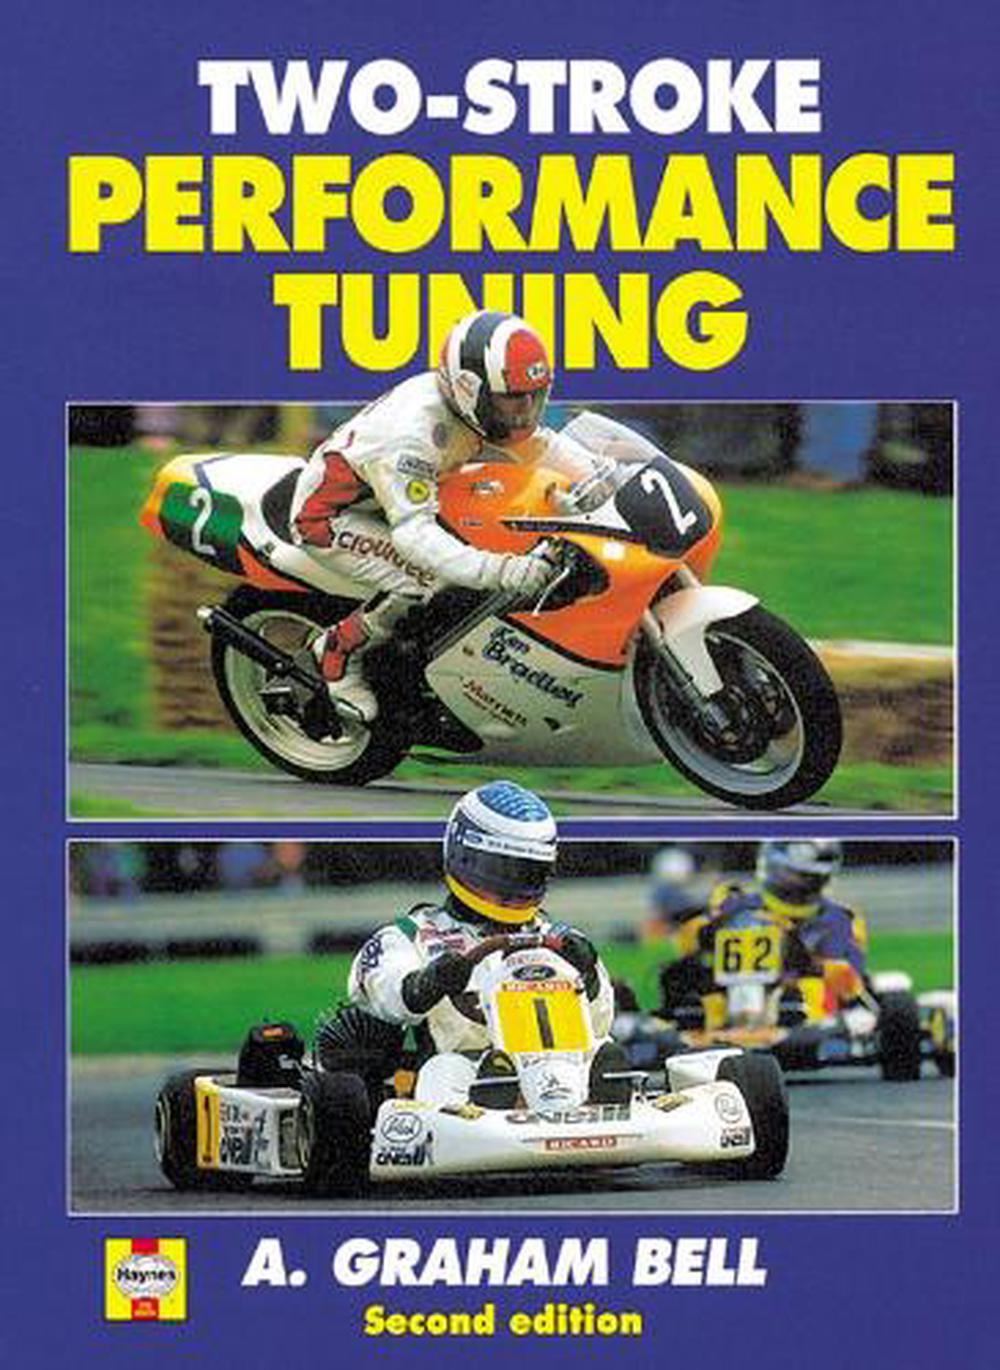 Two-Stroke Performance Tuning: Second edition by A. Graham Bell